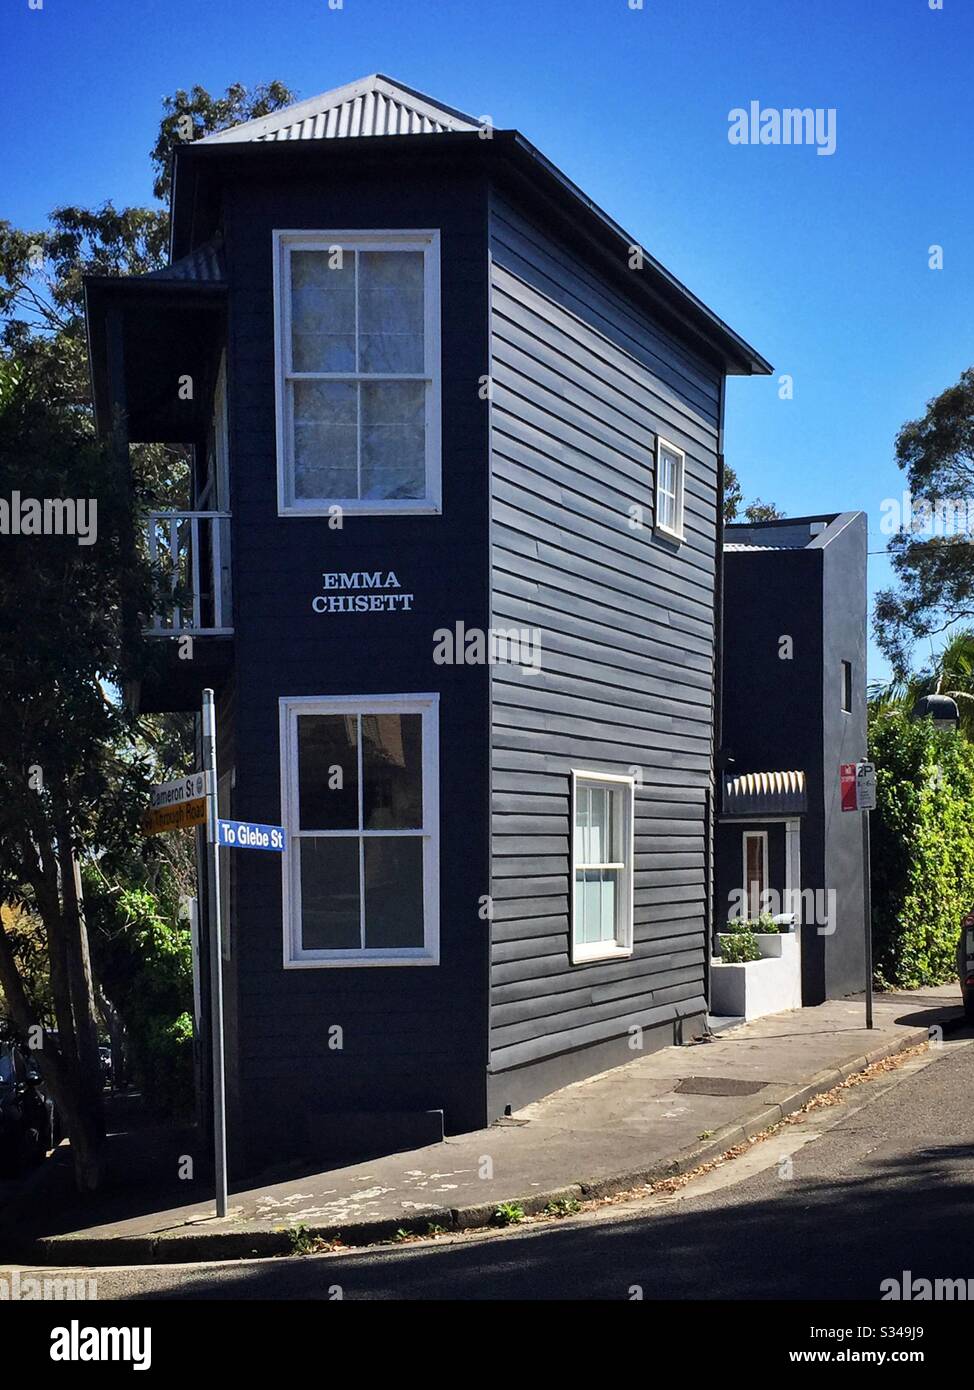 A renovated 1860 weatherboard corner store in Edgcliff, Sydney, NSW, Australia. The name 'Emma Chisett' is a Strine variant of the request 'How much is it?' Stock Photo